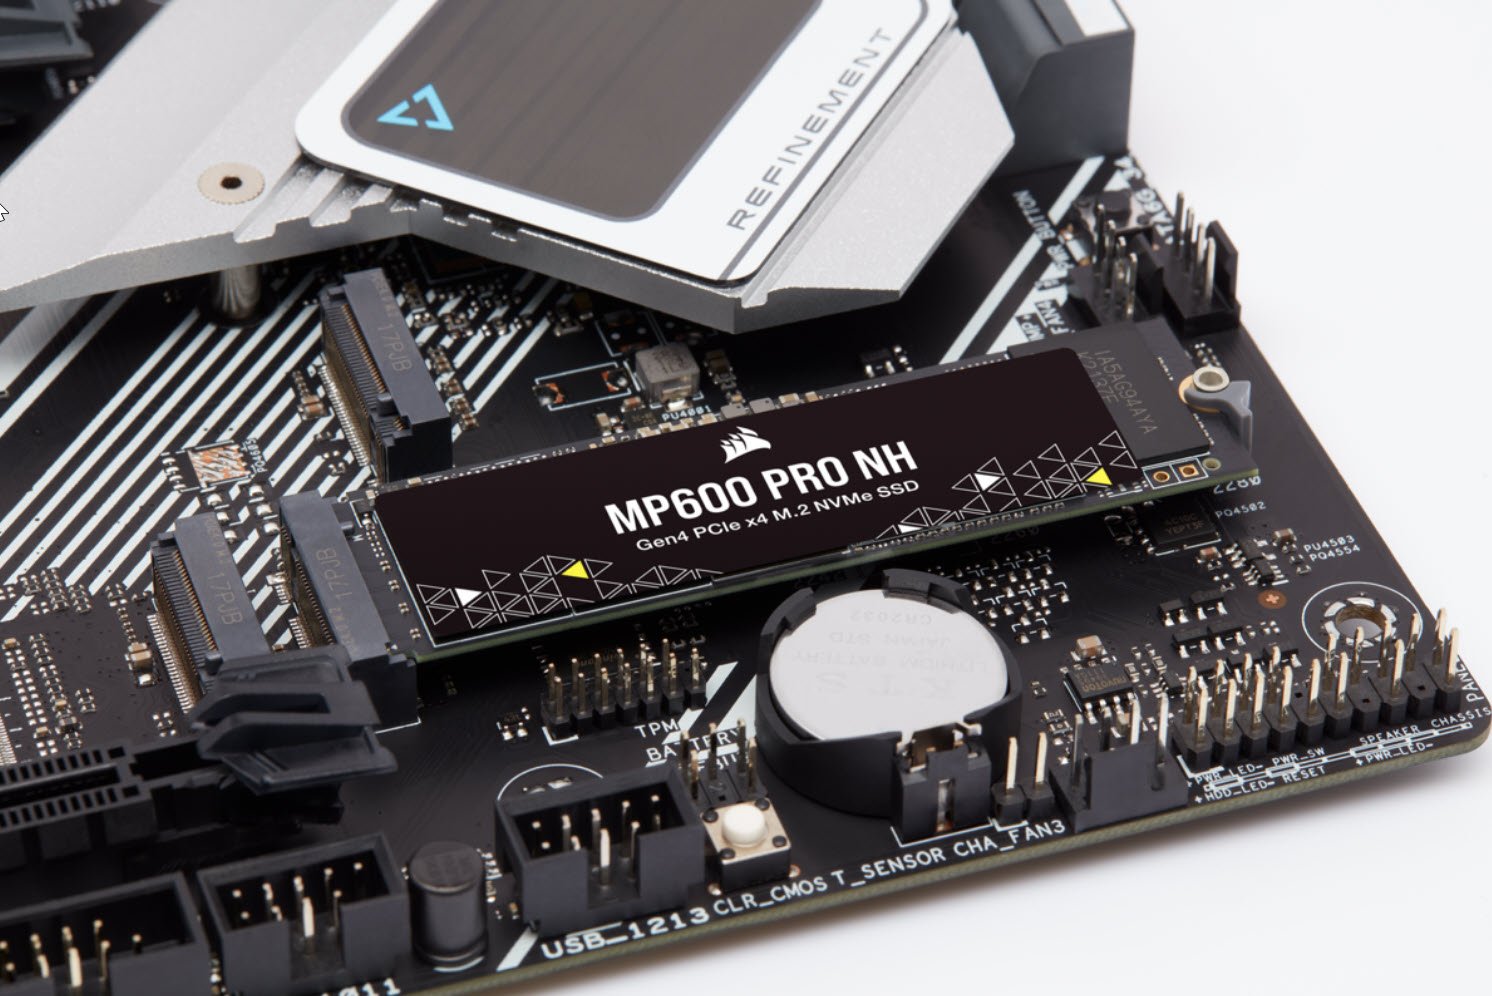 More information about "Corsair MP600 PRO NH 2TB SSD Review"